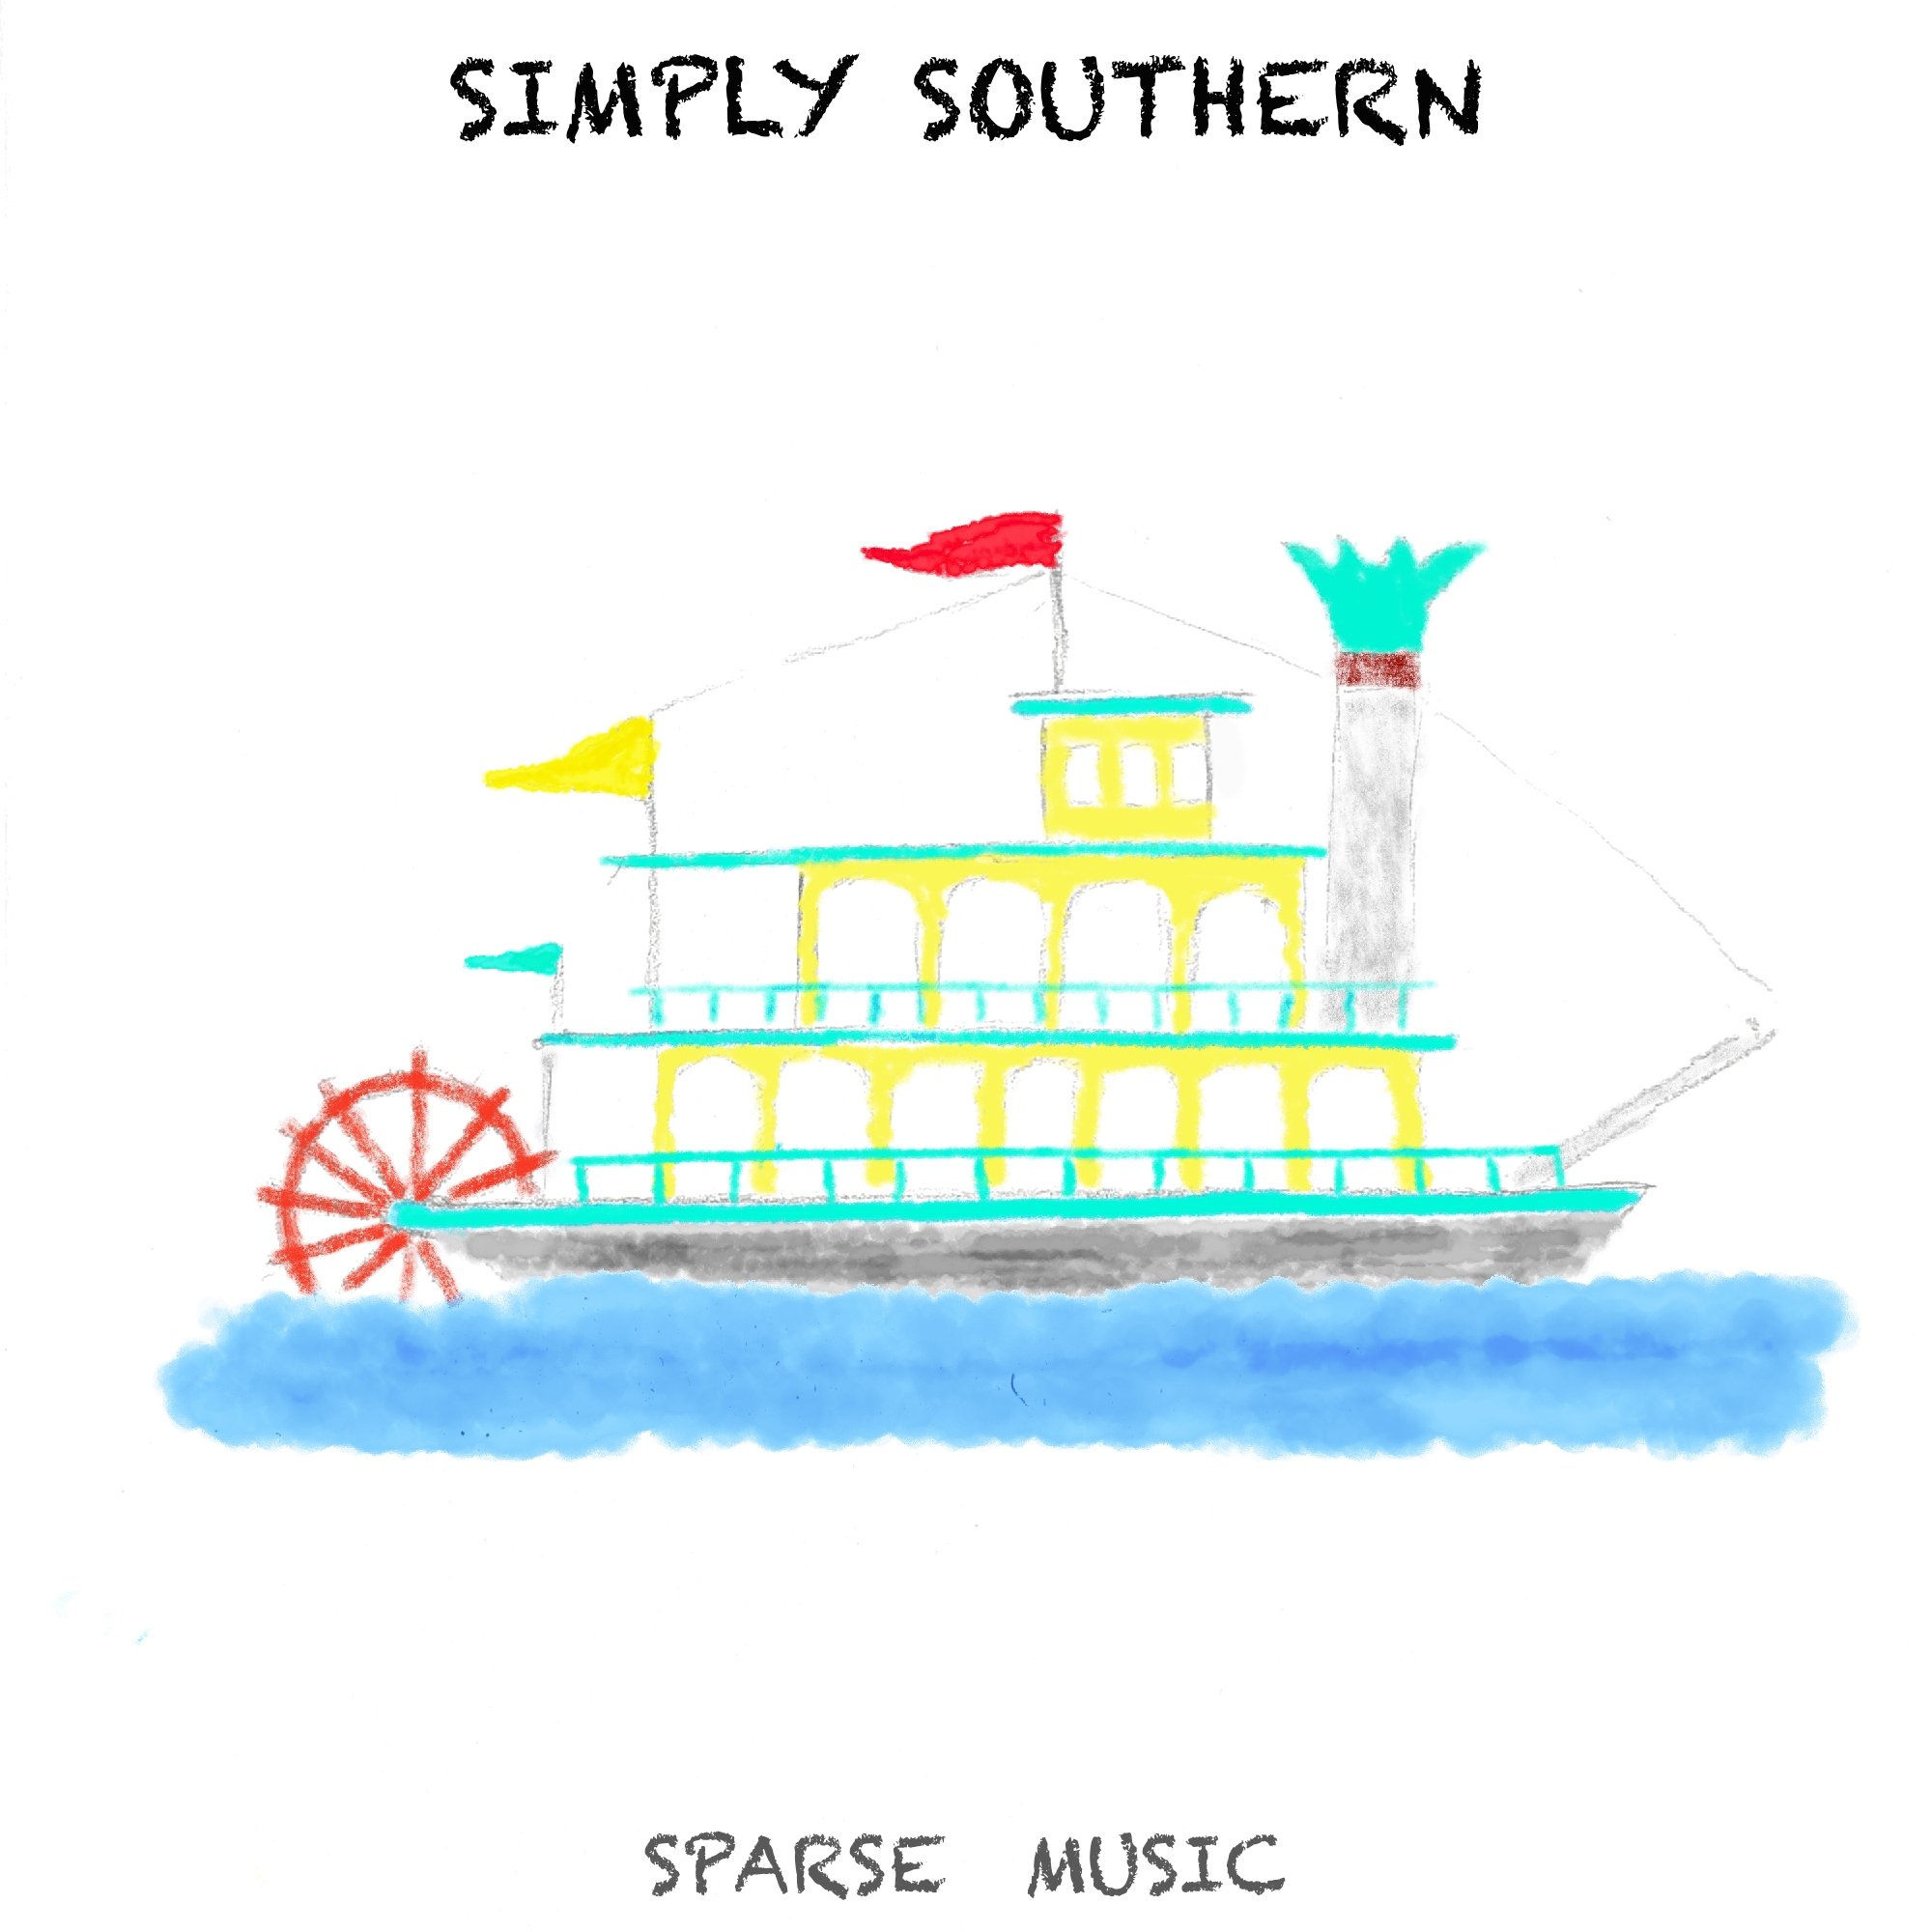 SPRS 01093 SIMPLY SOUTHERN 2000